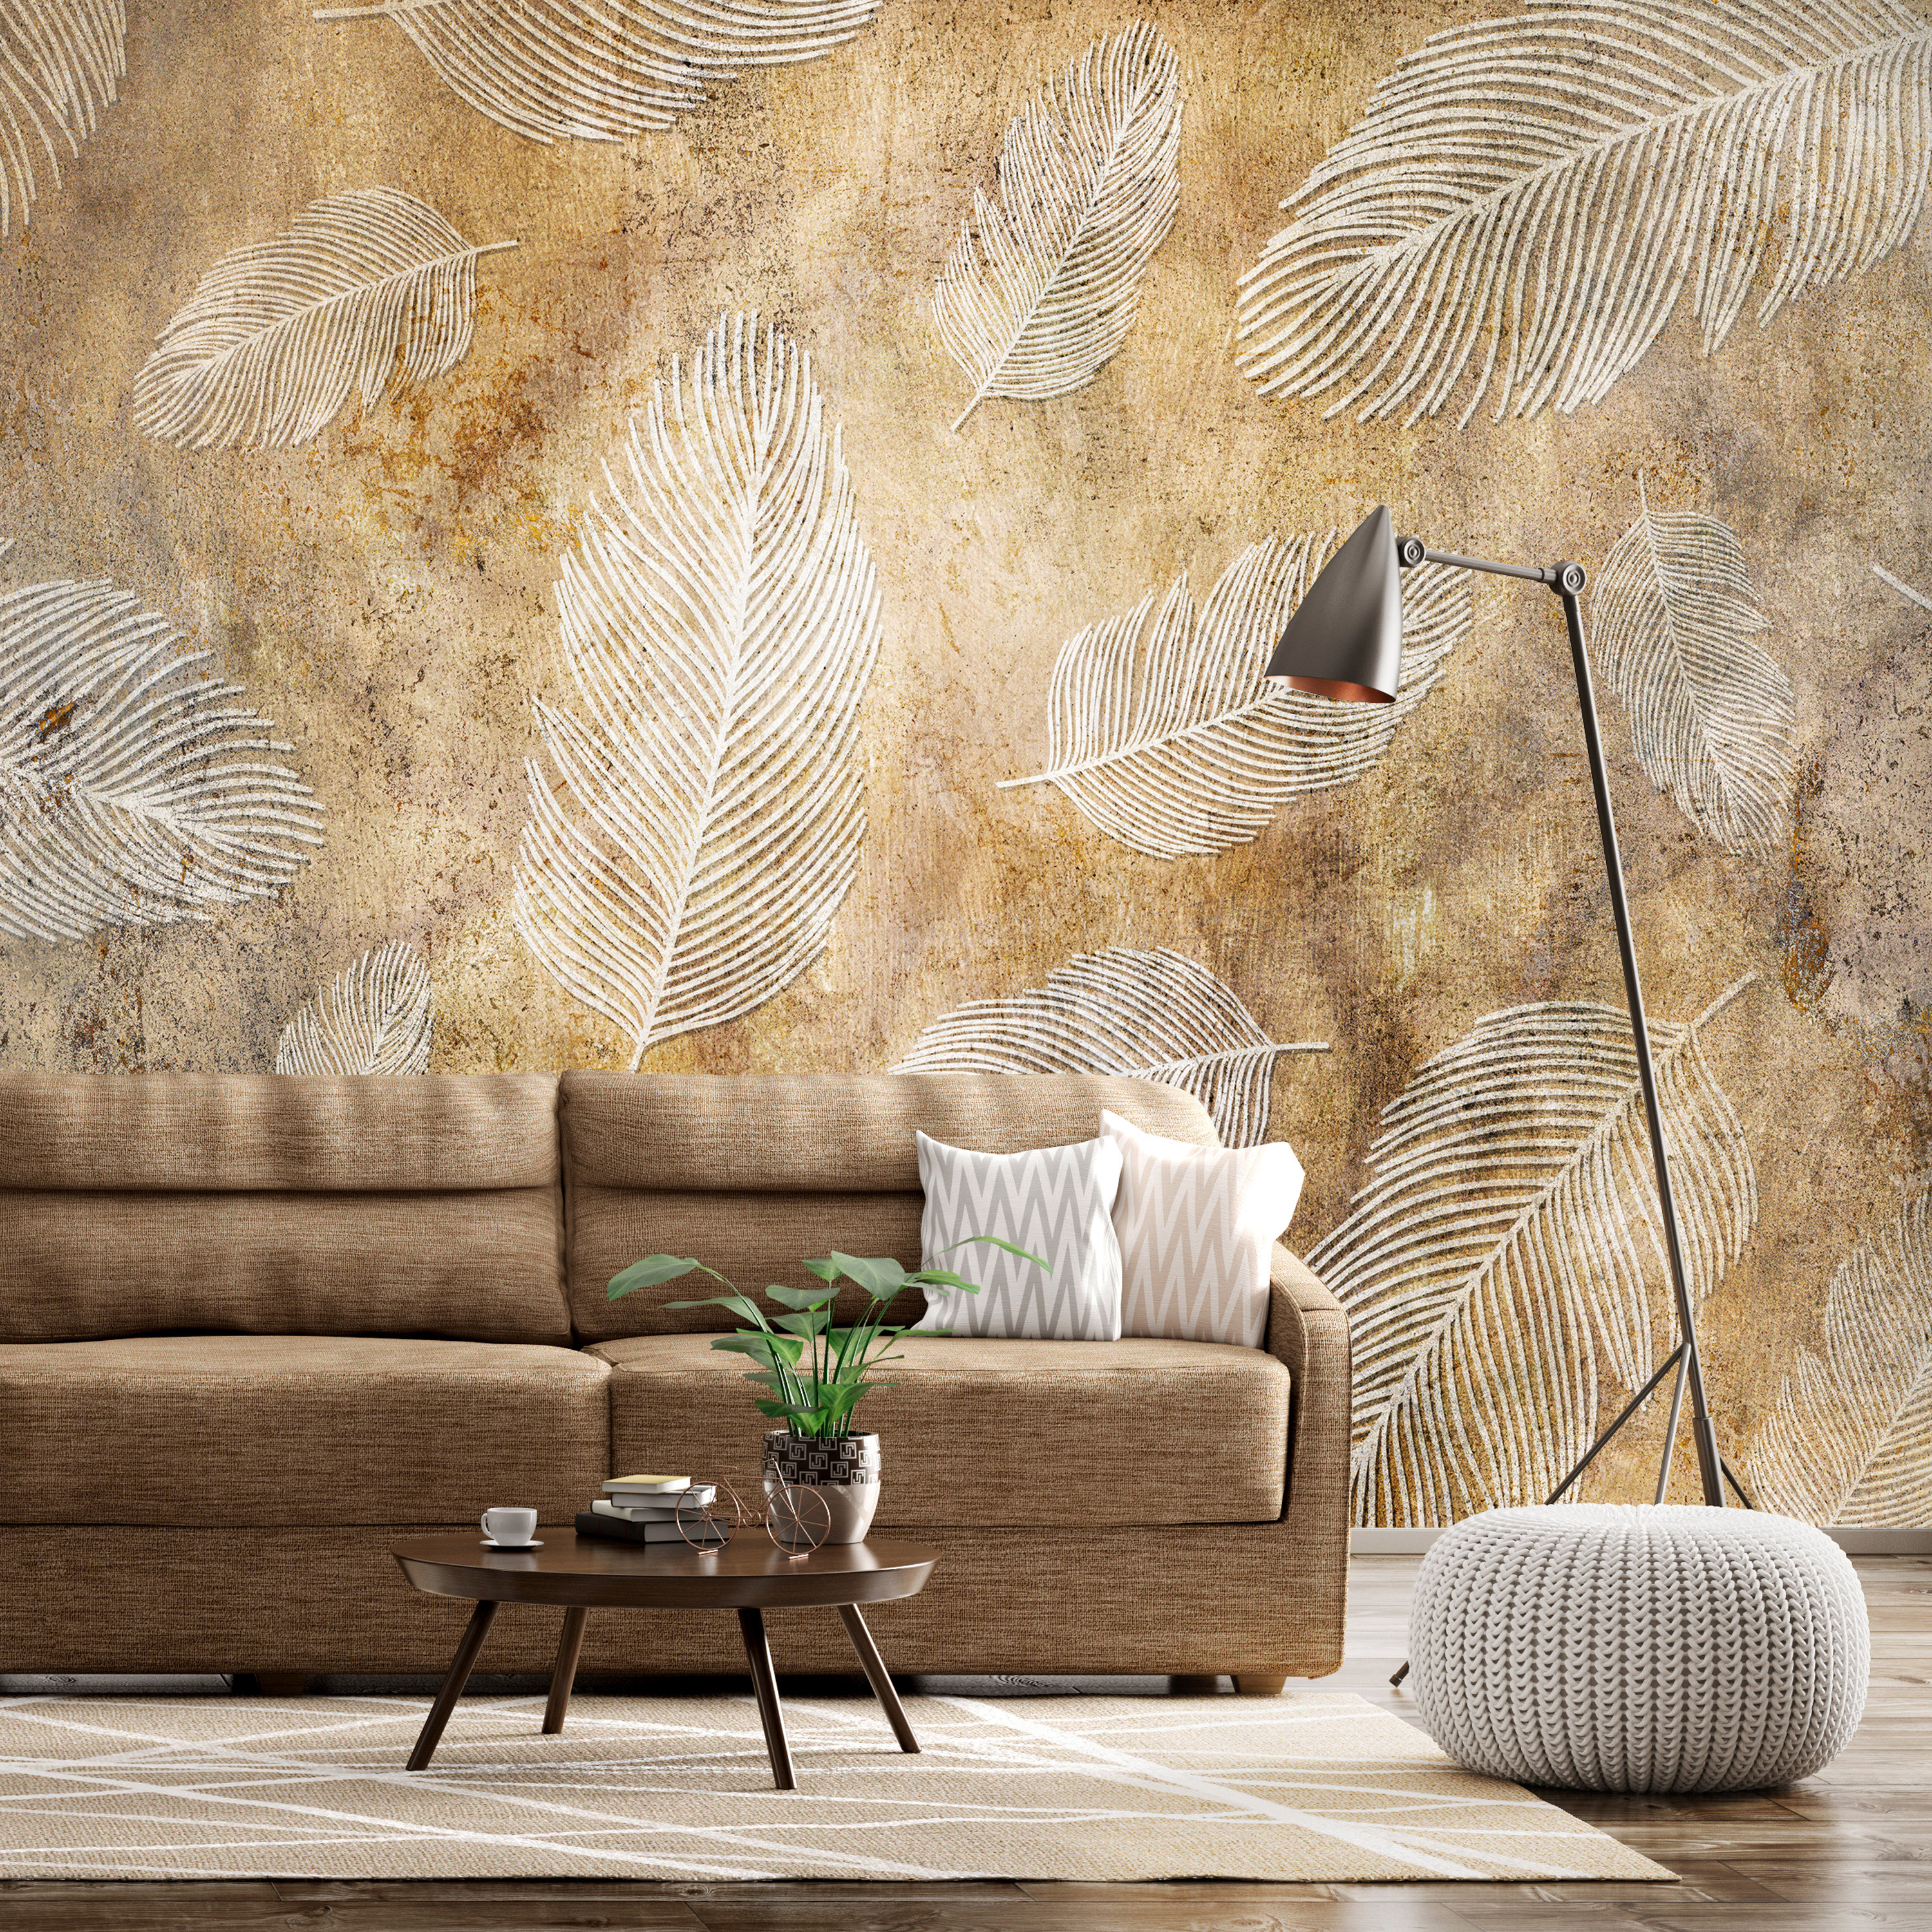 Self-adhesive Wallpaper - Flying Feathers - 392x280